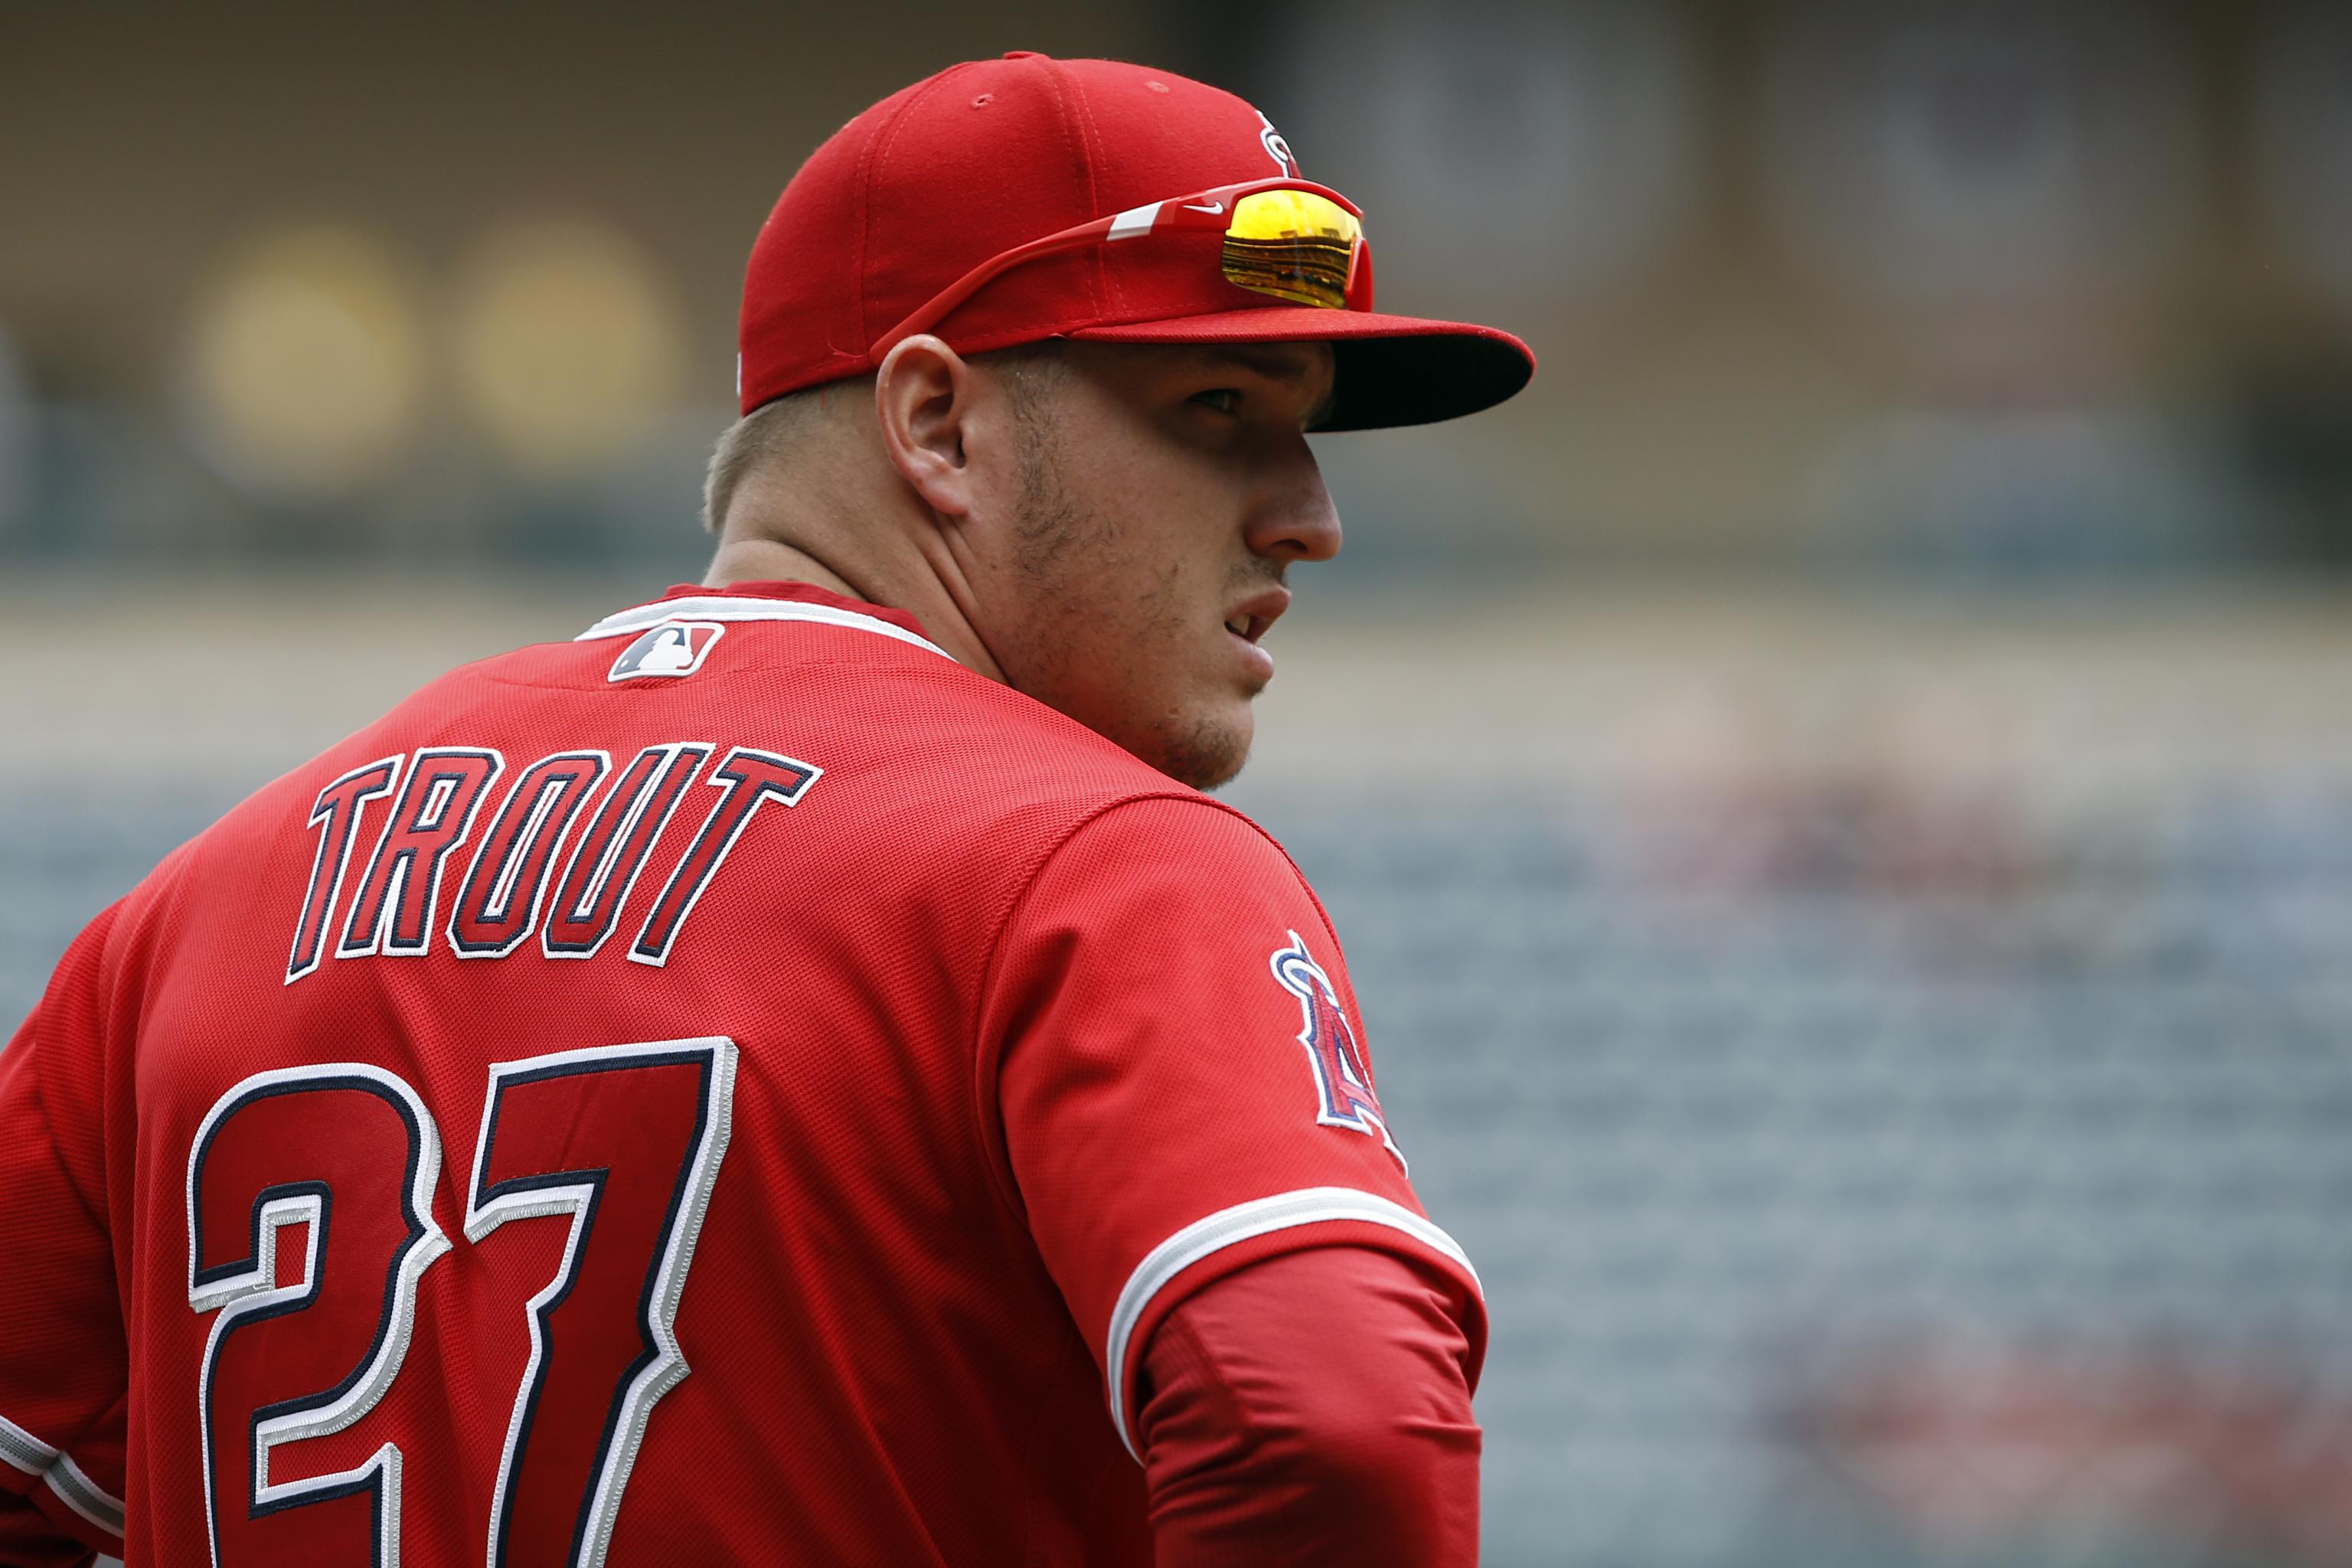 Now more than ever, Mike Trout knows it's his time to step up and lead